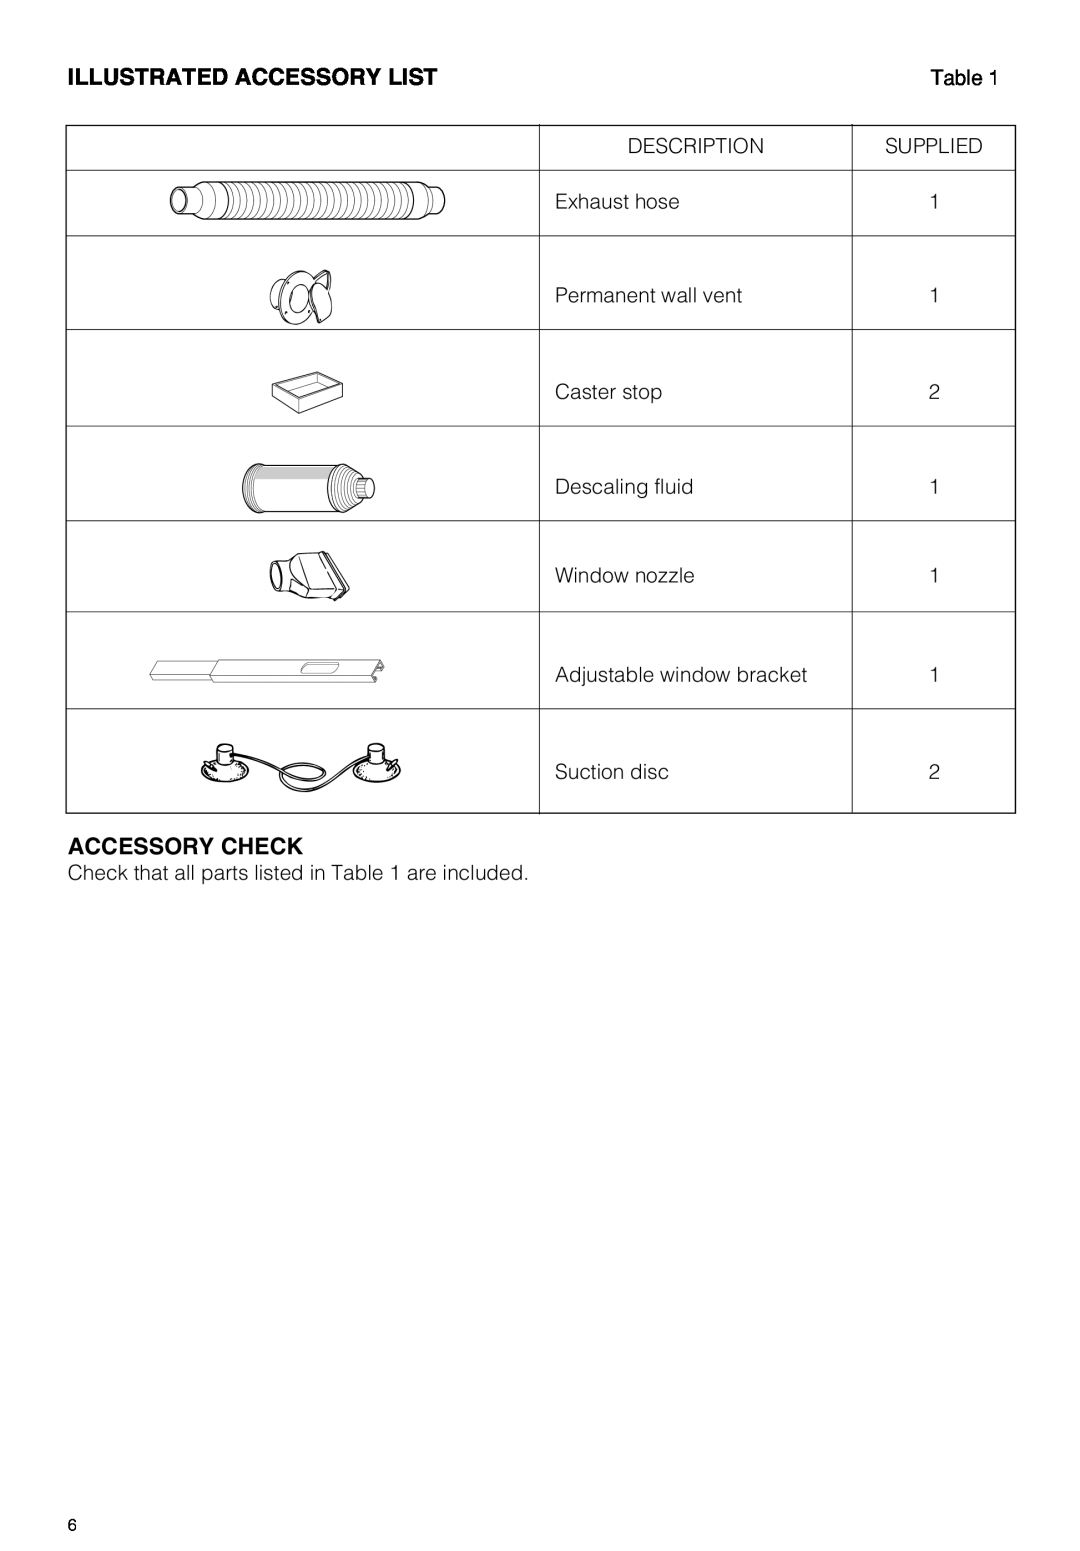 DeLonghi PAC 290 U owner manual Illustrated Accessory List, Accessory Check 